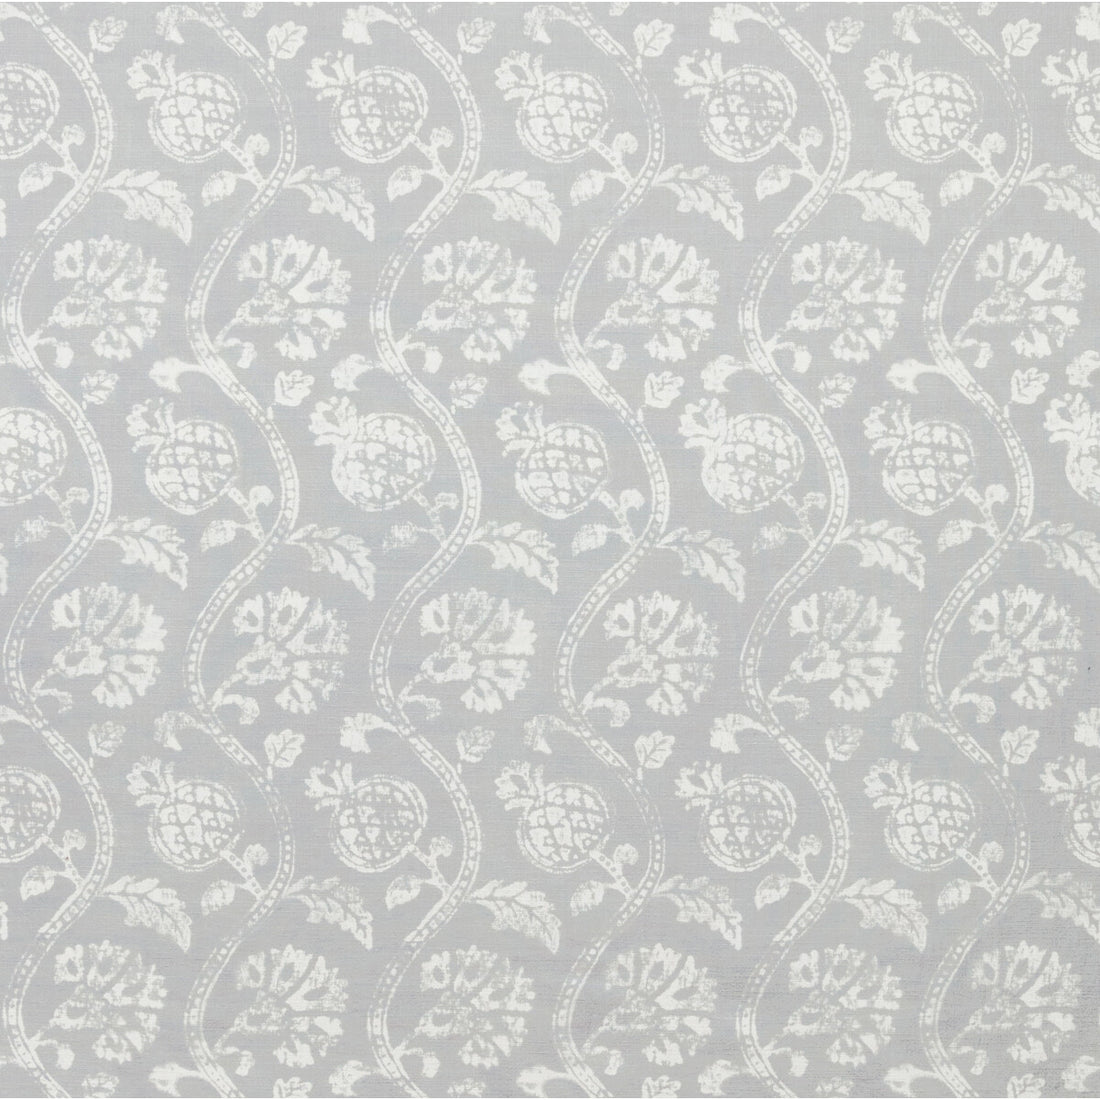 Amballa fabric in overcast color - pattern AMBALLA.11.0 - by Kravet Basics in the Ceylon collection